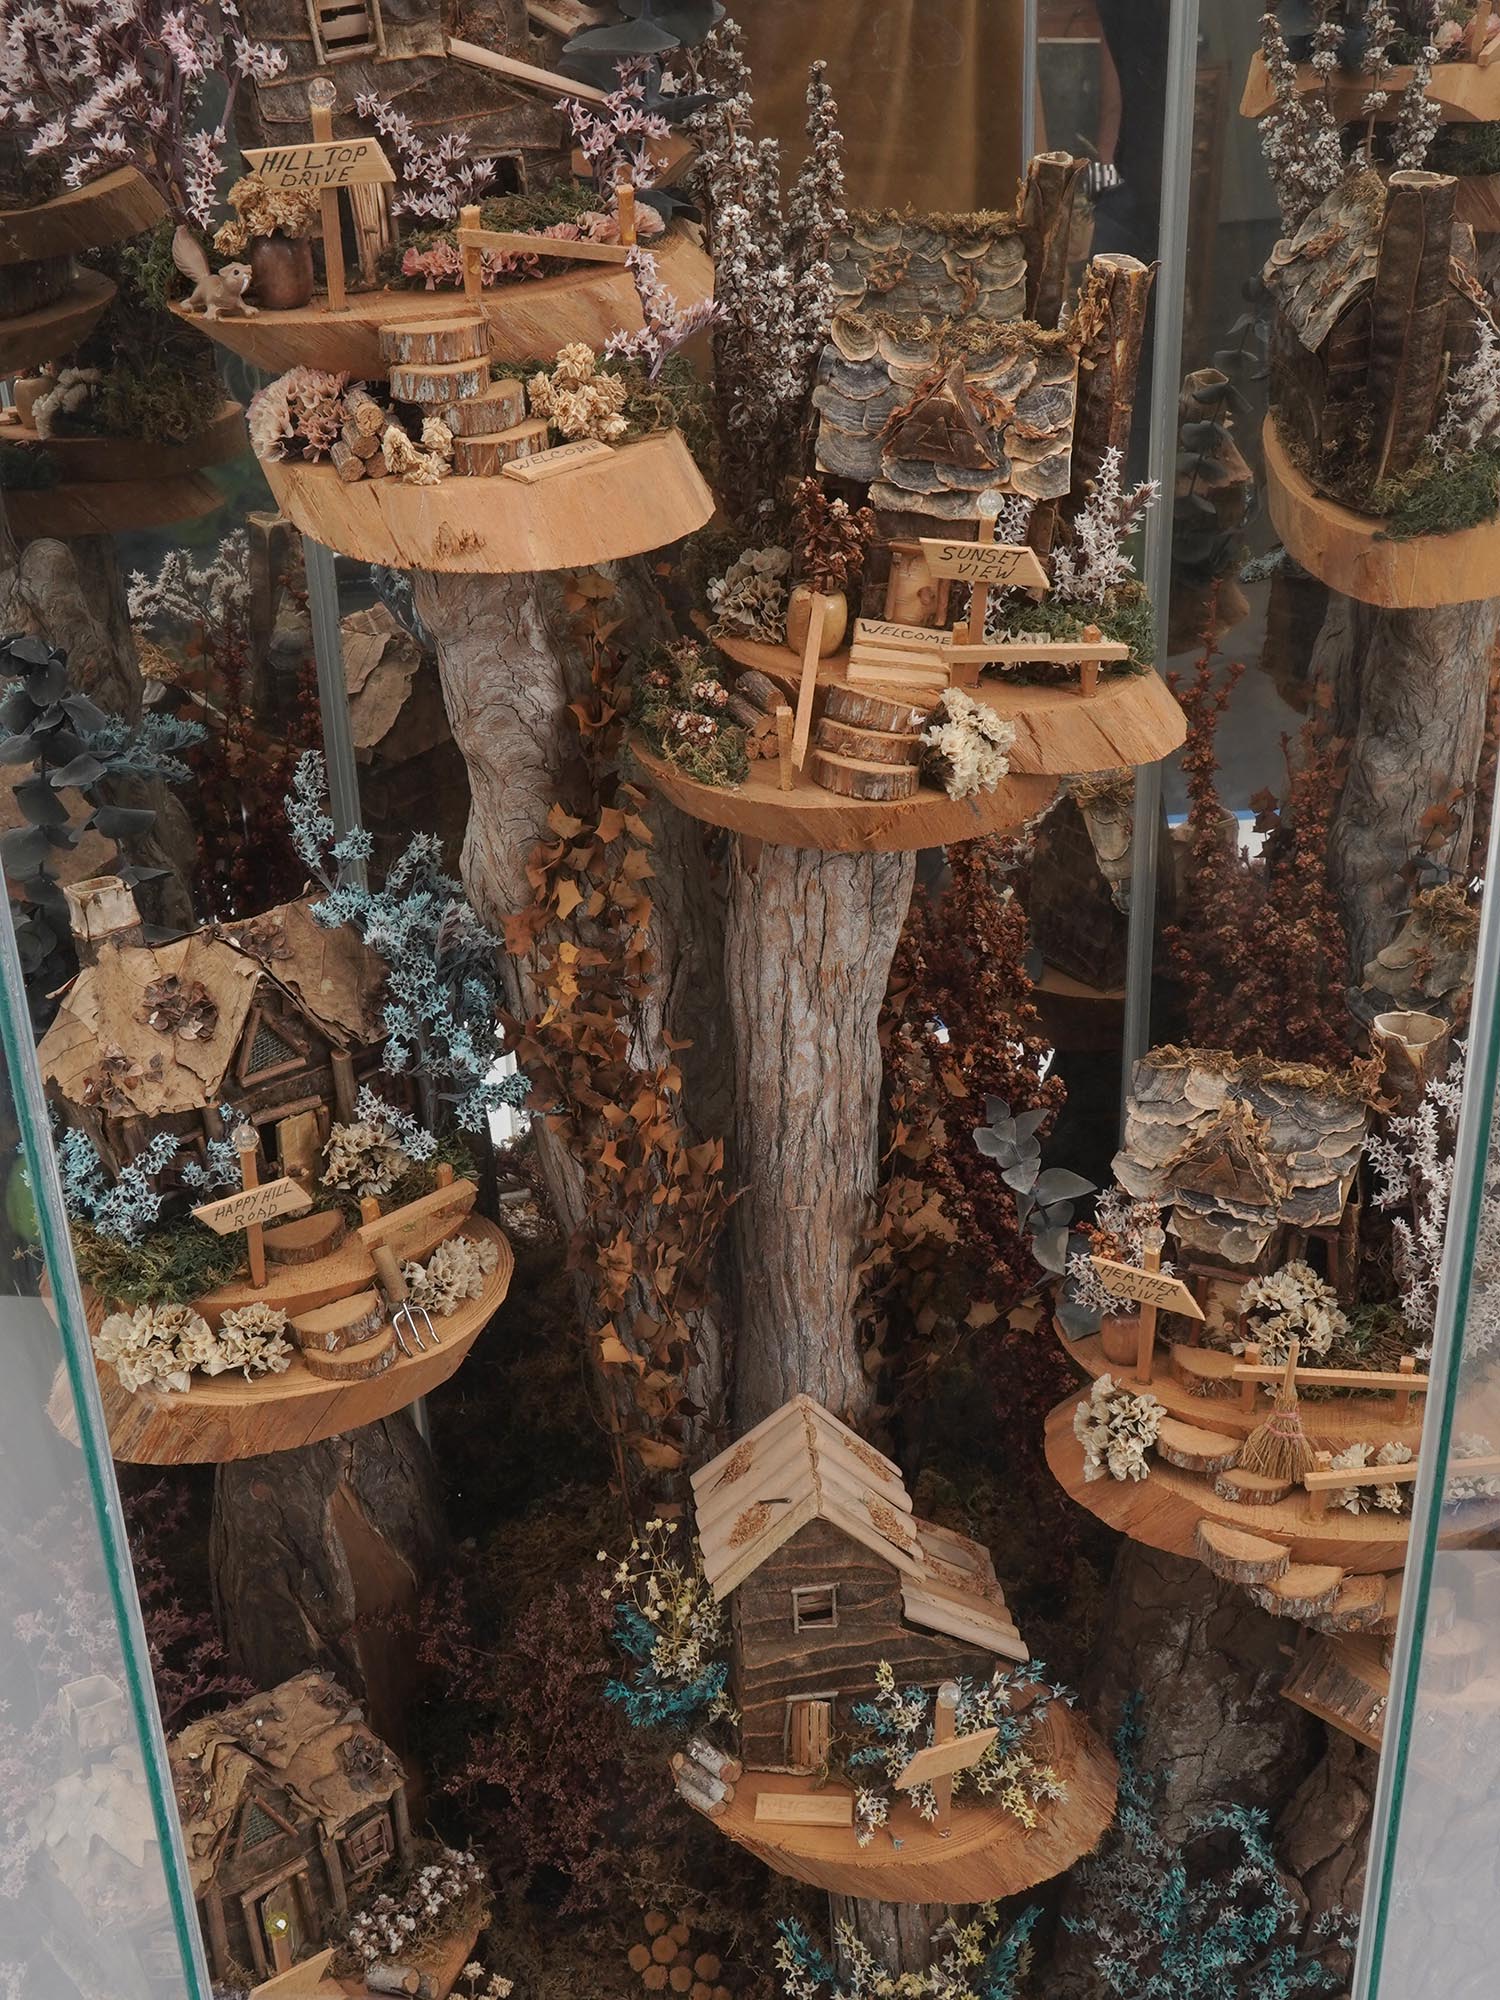 LARGE HANDMADE TREE HOUSE DIORAMA IN GLASS CASE PIC-1